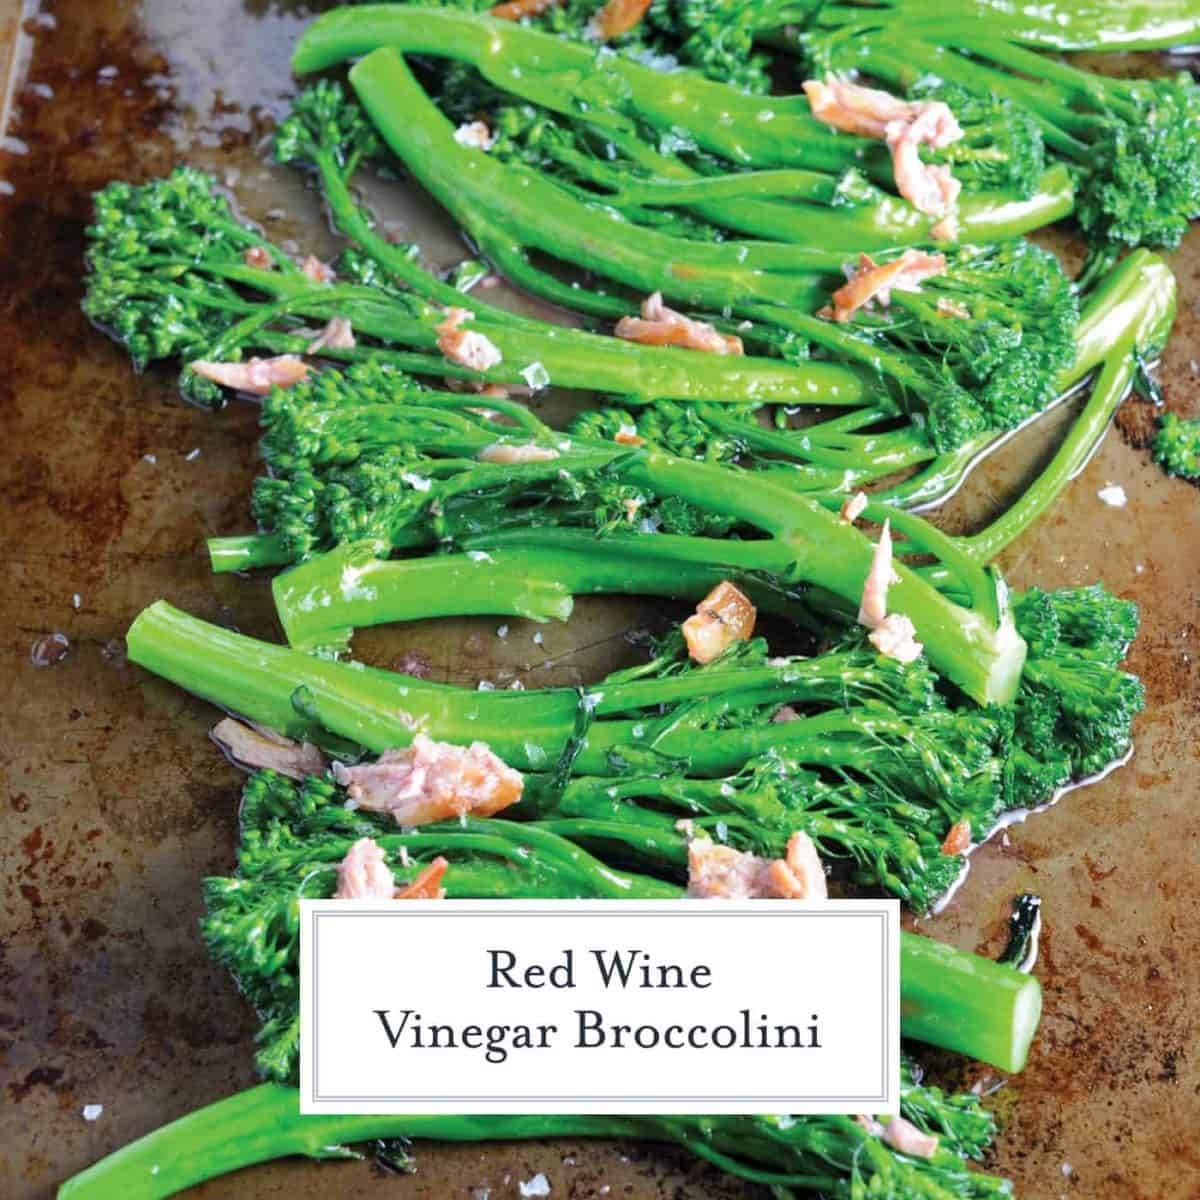 Red Wine Vinegar Broccolini combines fresh flavors of tender broccolini with garlic and snappy red wine vinegar for a simple, healthy and tasty side dish recipe. #broccolini #sidedisherecipes www.savoryexperiments.com